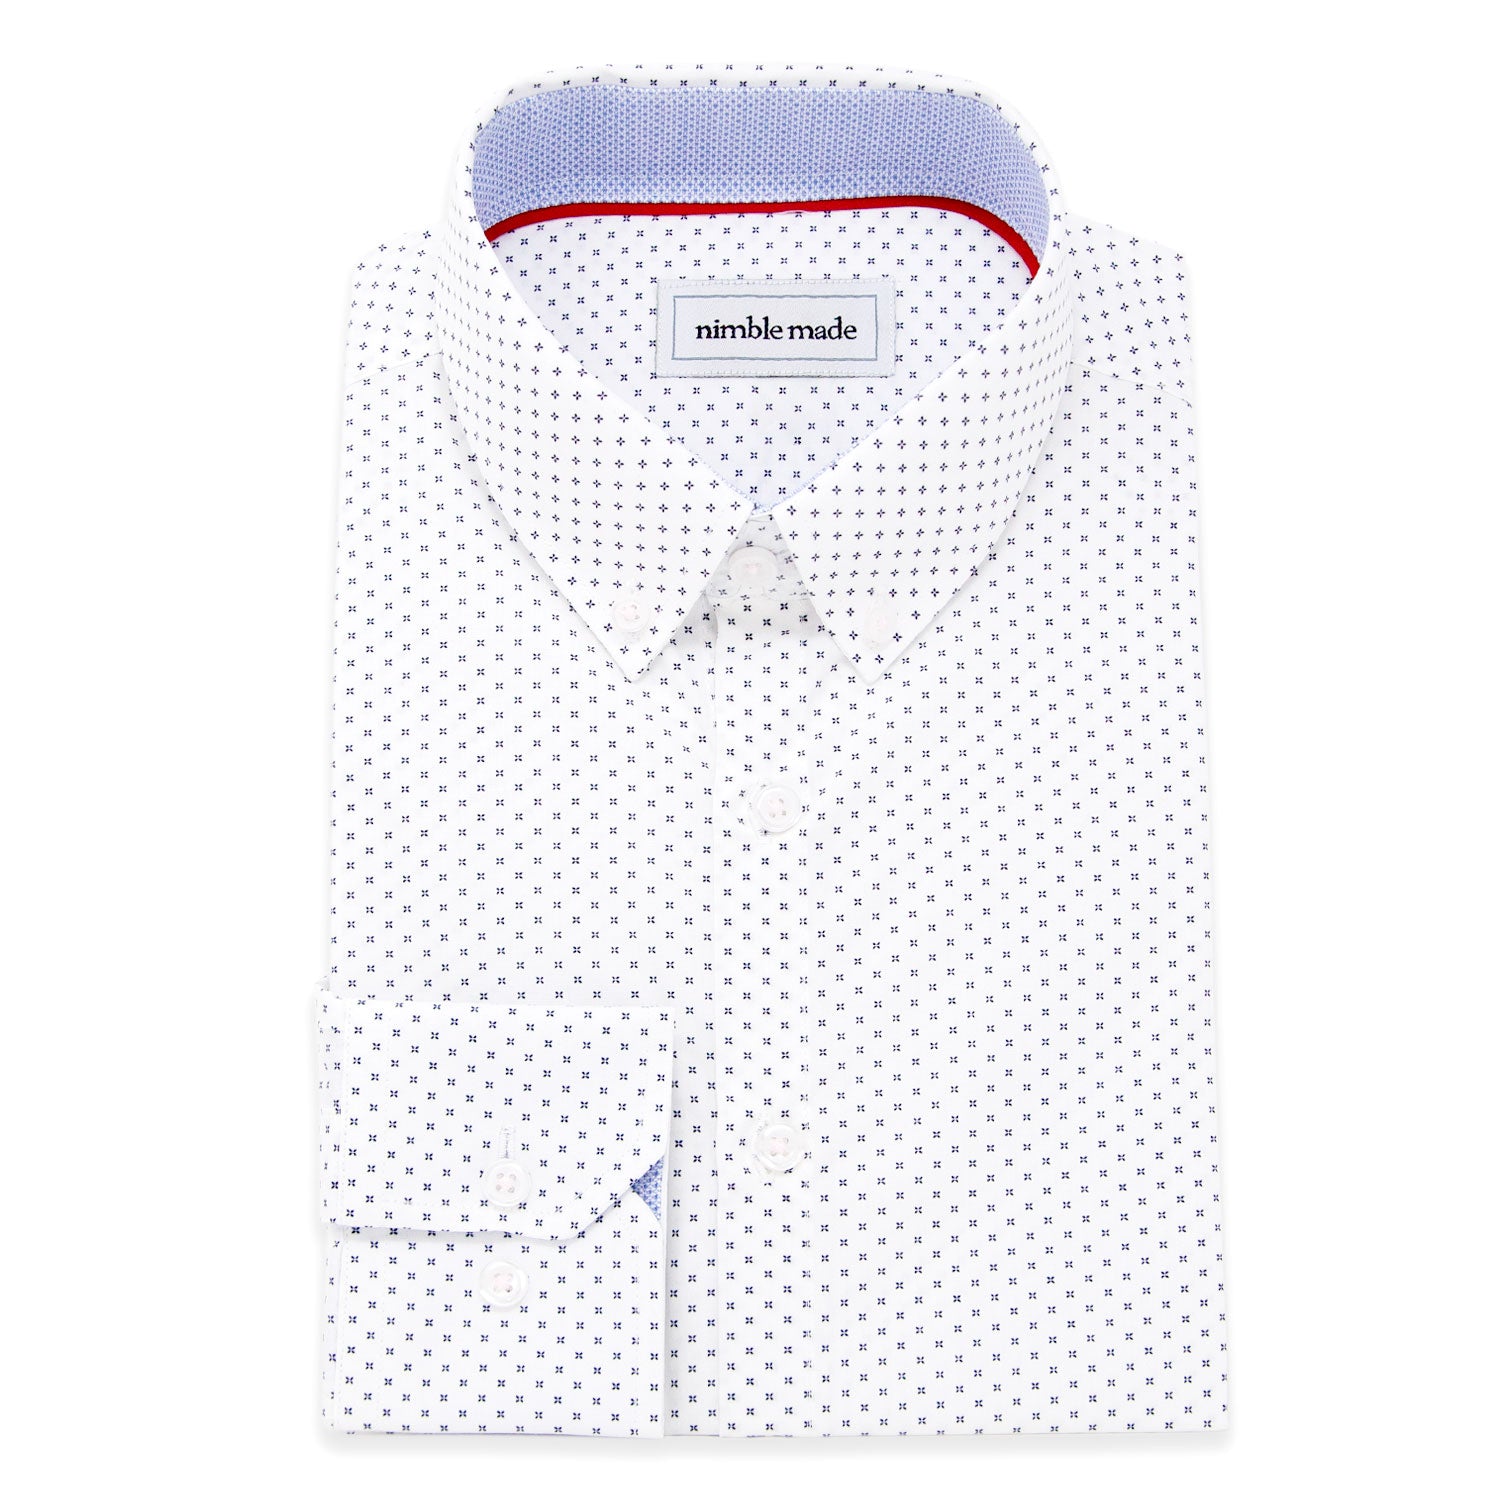 White slim fit shirt with red floral collar and cuffs and red buttons